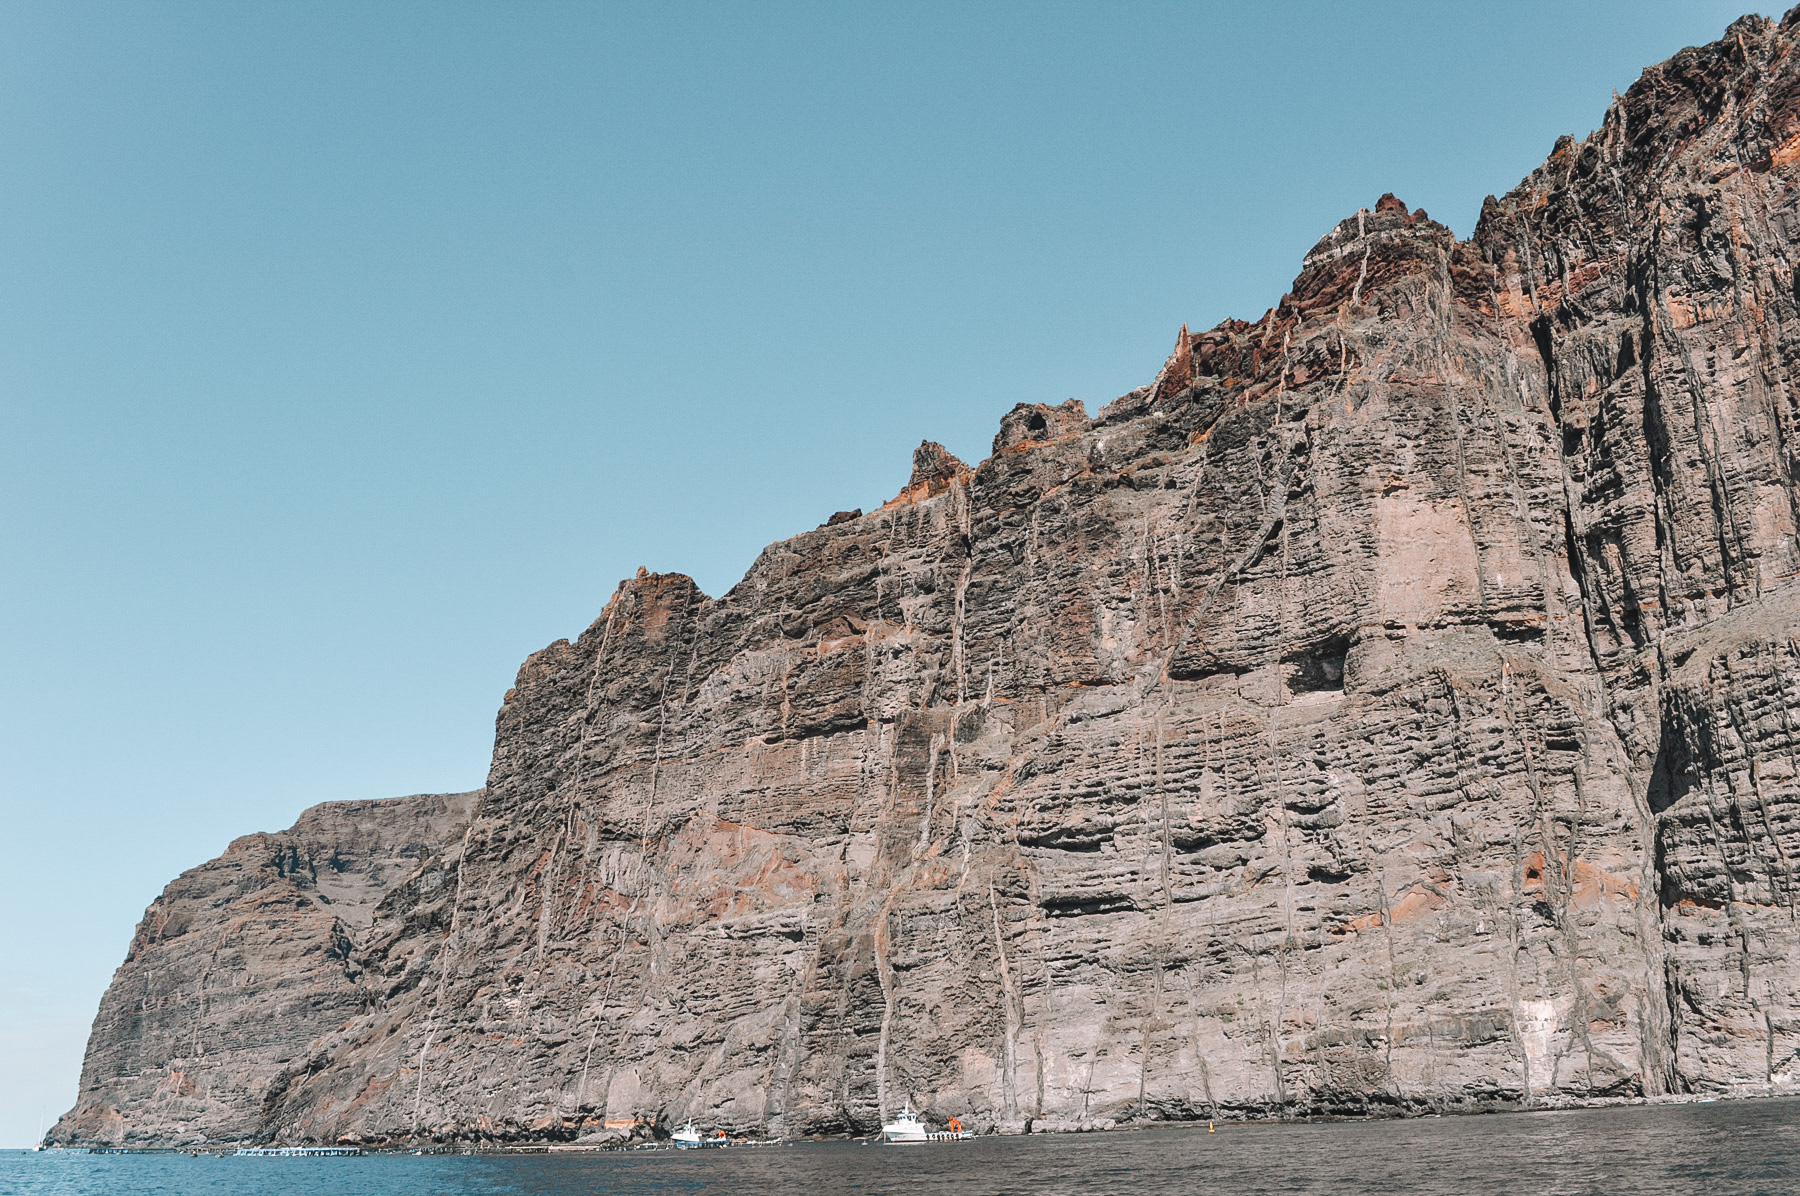 The cliffs of Los Gigantes in Tenerife, Canary Islands